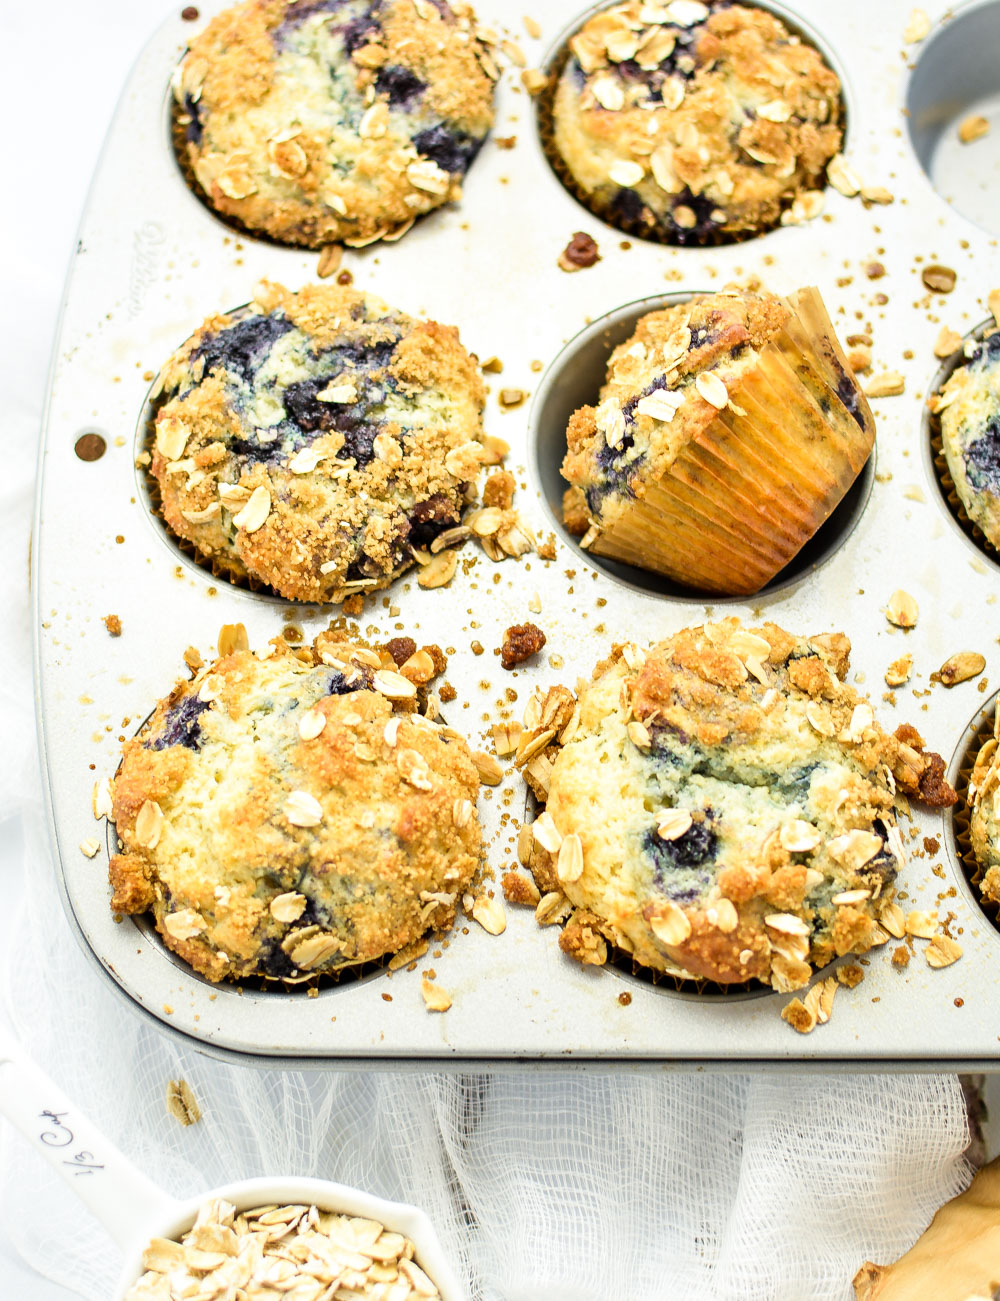 Blueberry Sour Cream Oat Crumble Muffins are the perfect sweet treat and quick breakfast solution!